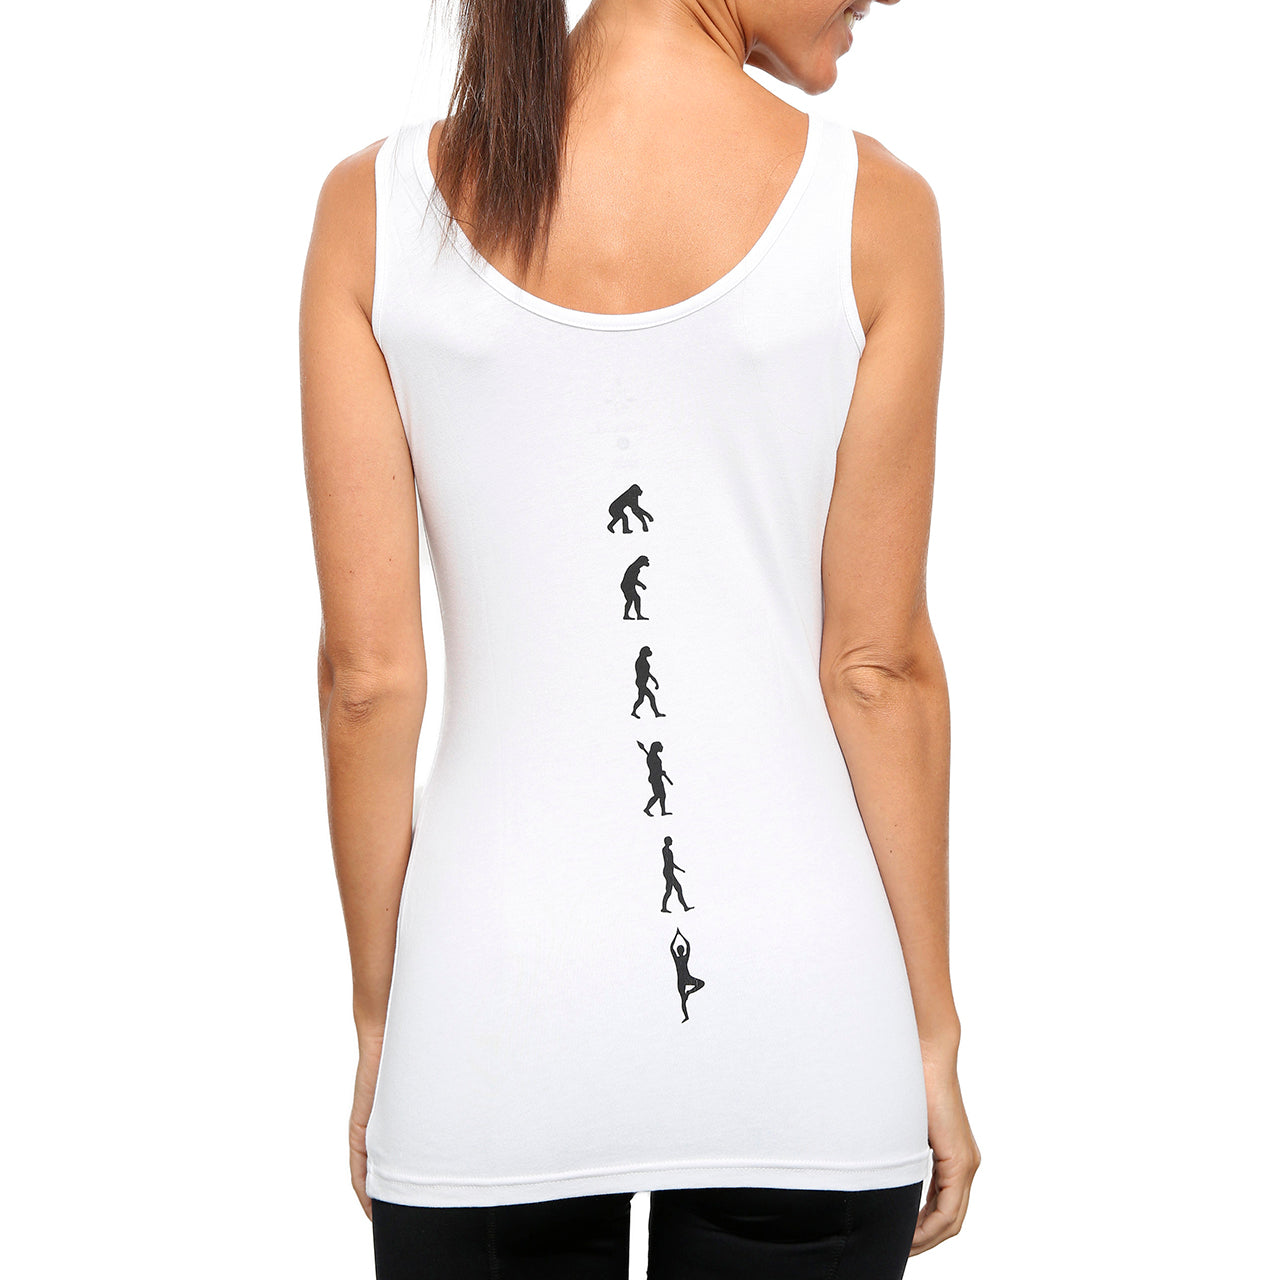 Yoga Tank Tops for Women Organic Cotton T-Shirts Best for Yoga